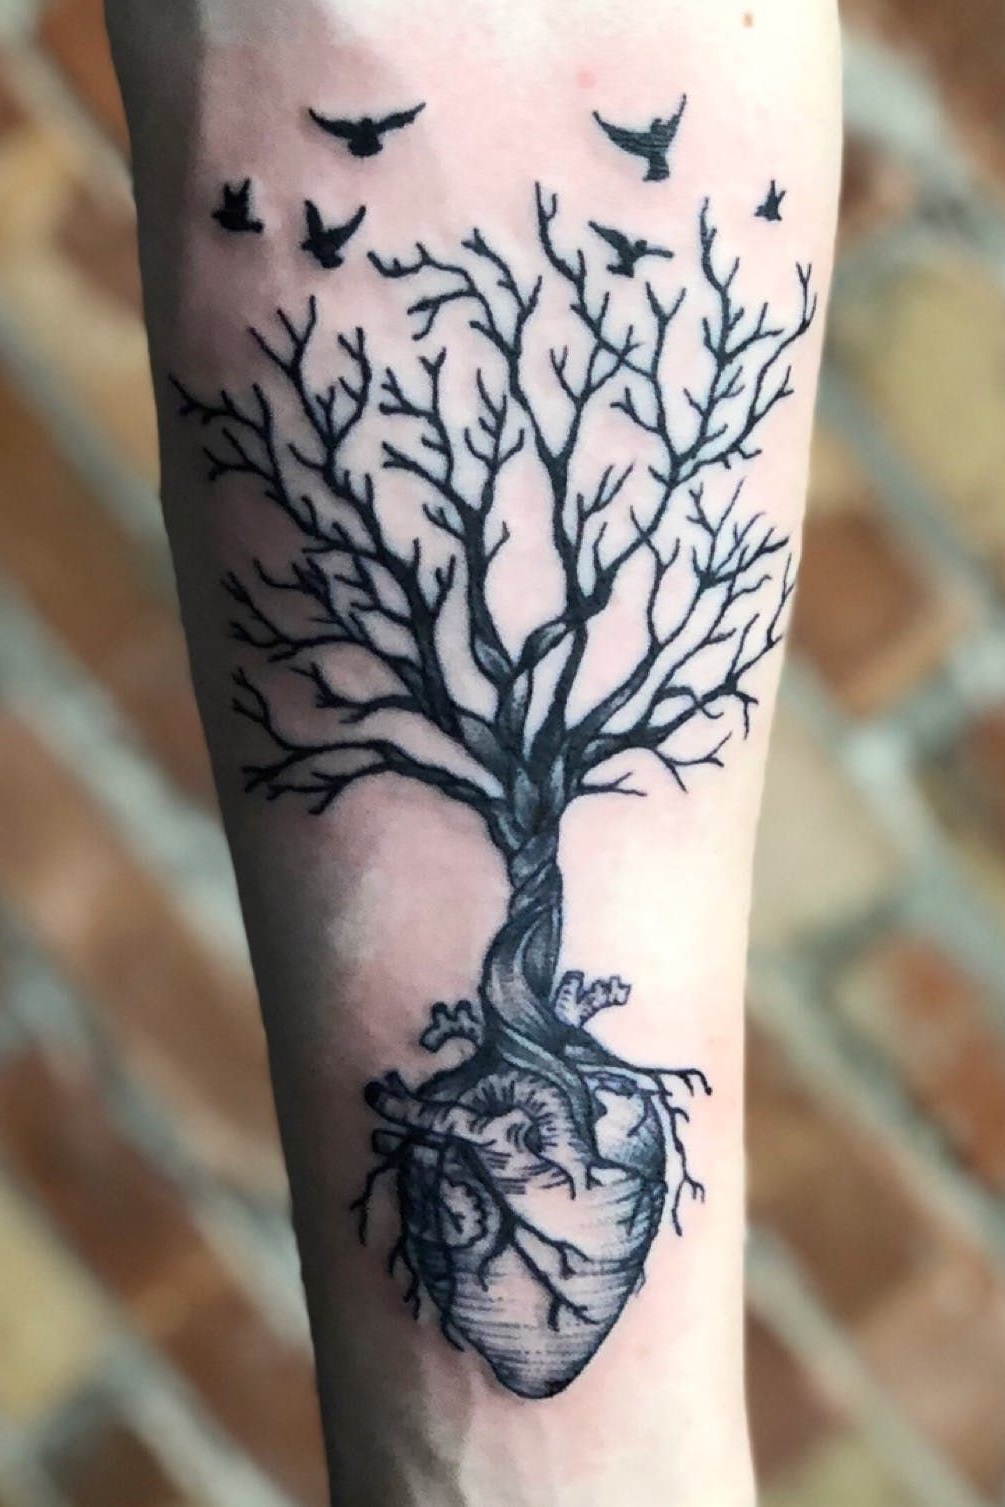 Tattoo arbre exceptionnel.